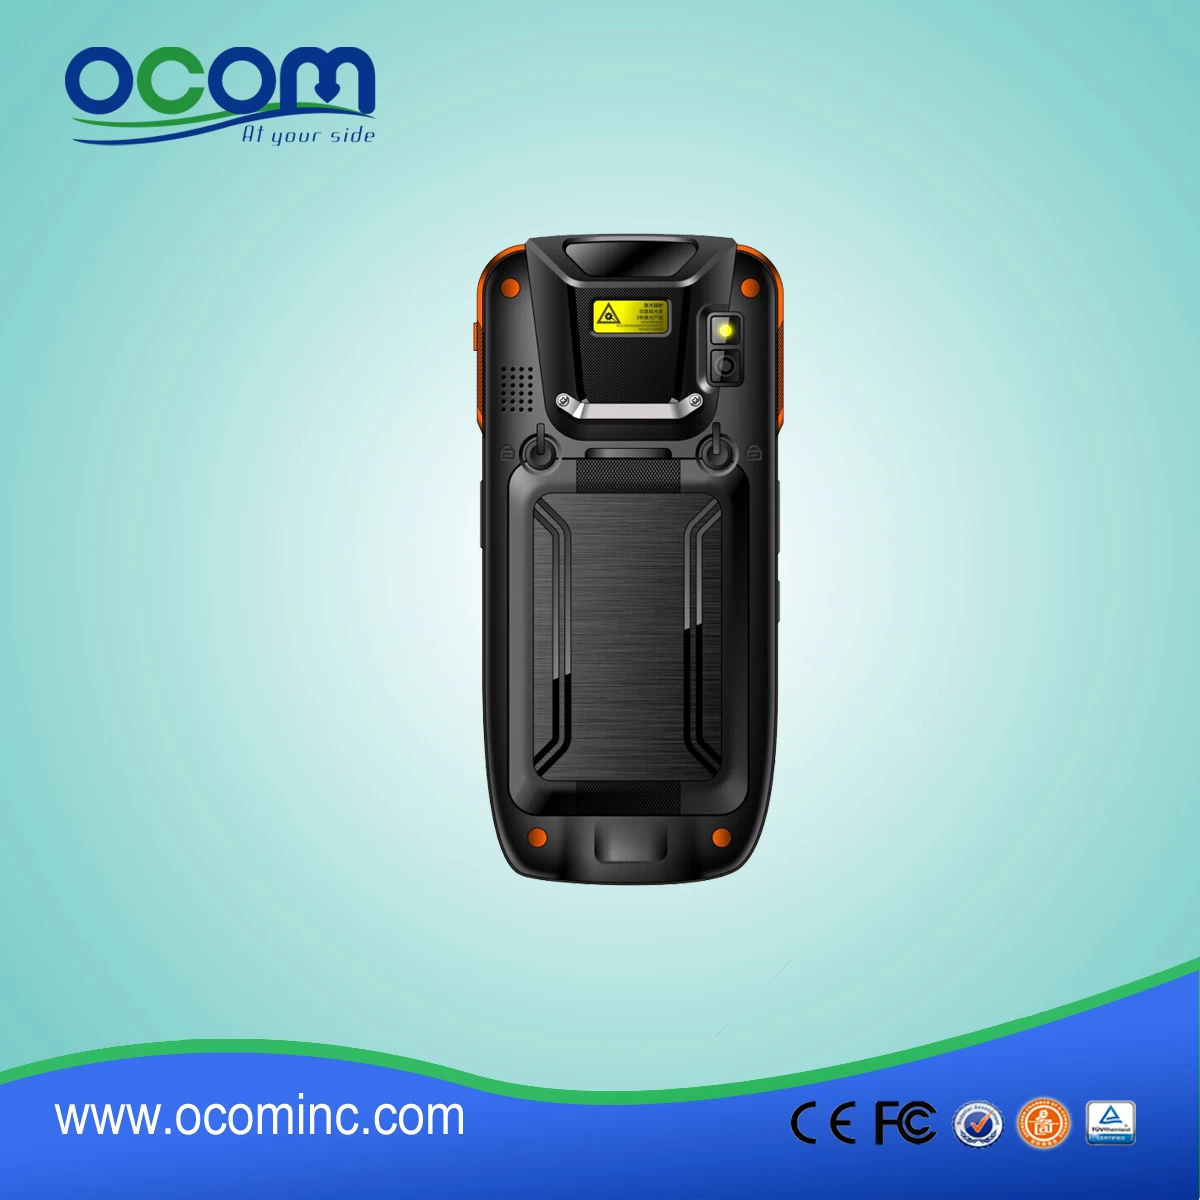 handheld industrial Android pda phone accessories (OCBS-D8000)